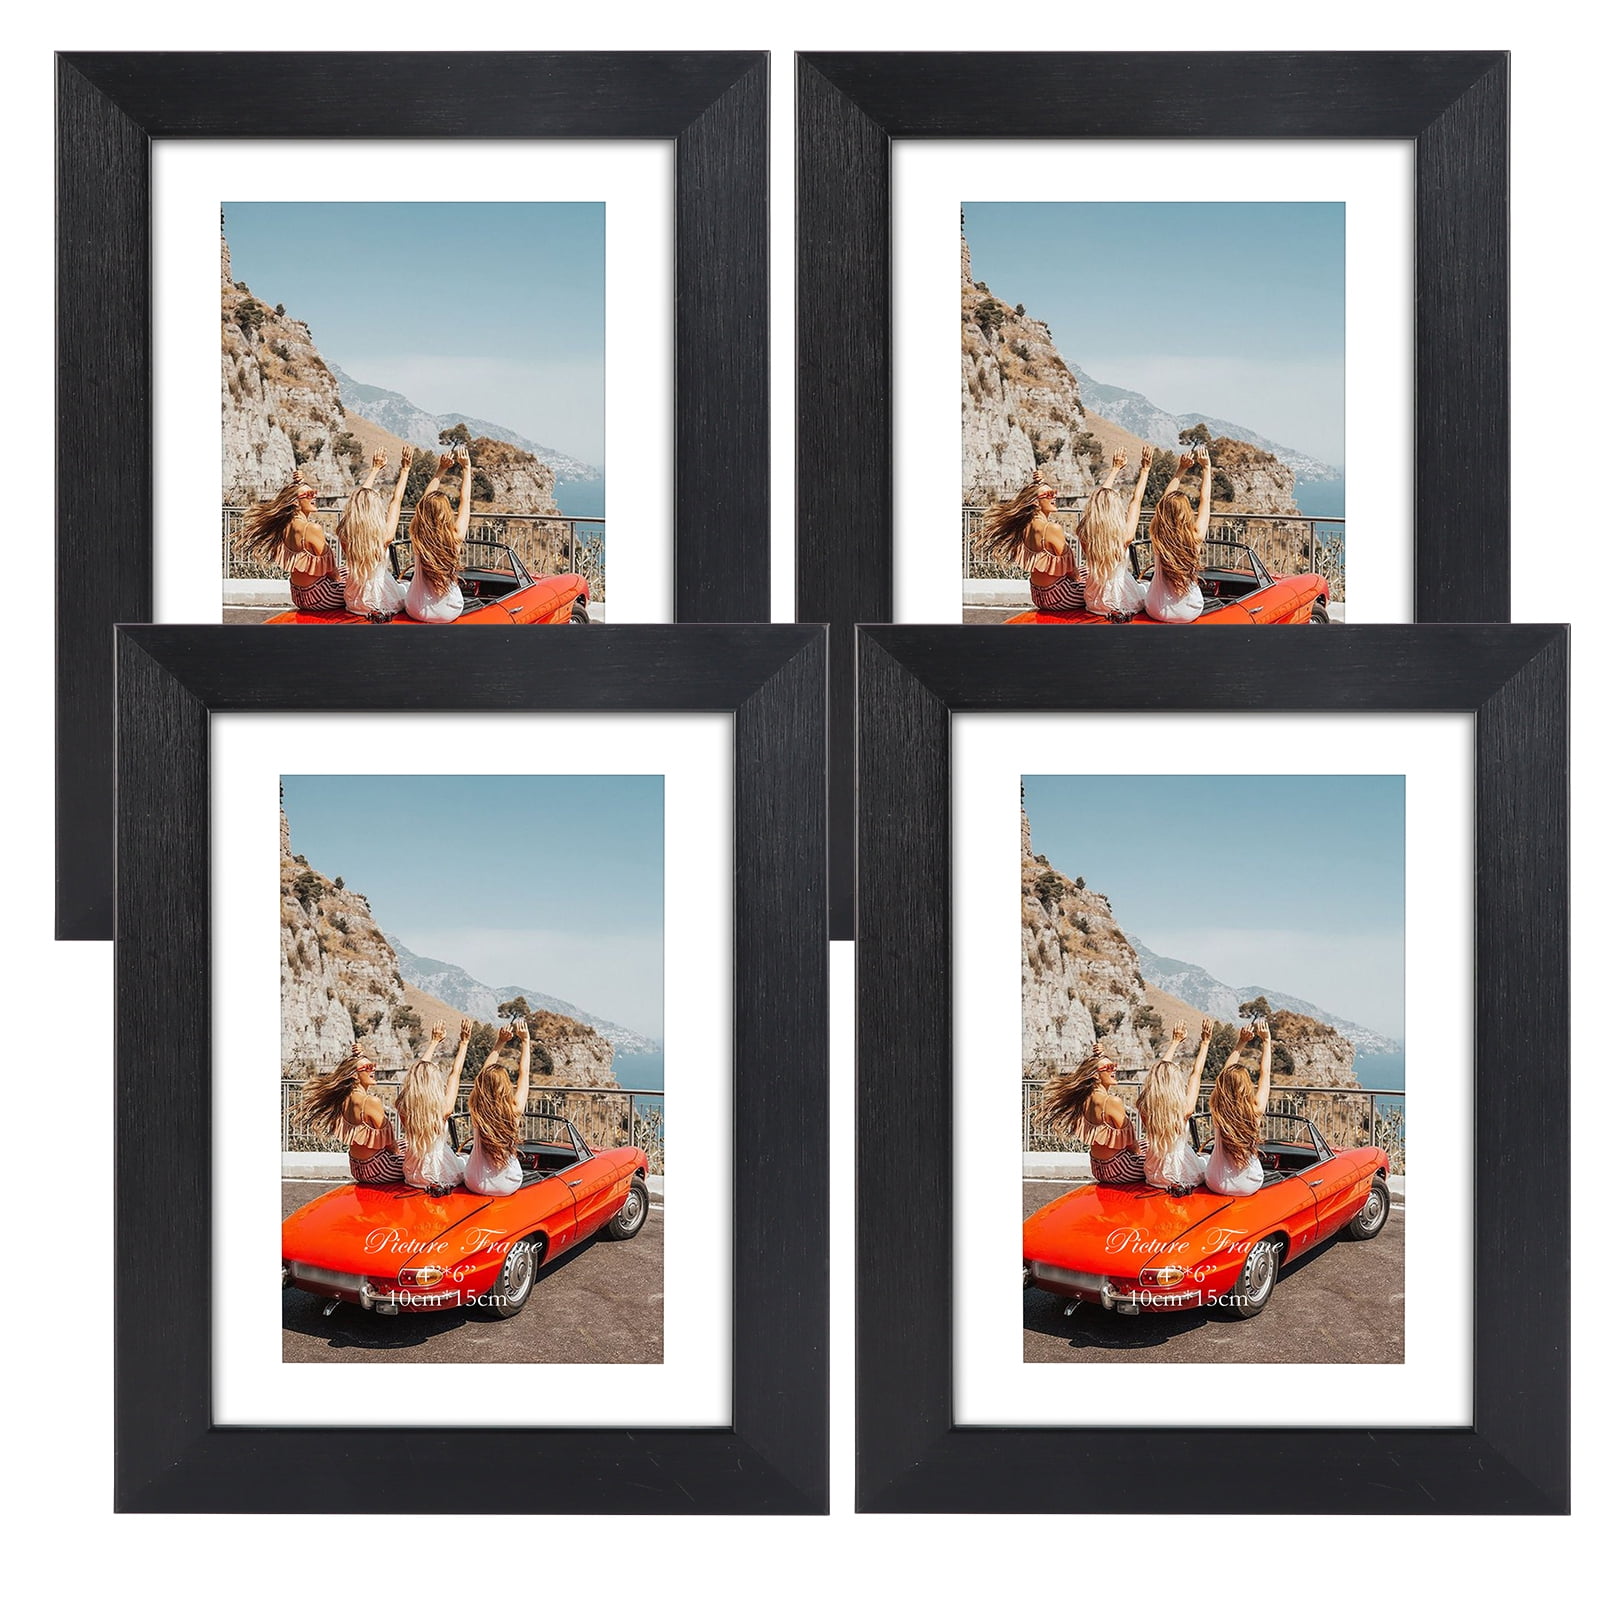 Mainstays 14x18 Matted to 11x 14 Flat Wide Black Gallery Wall Picture Frame 